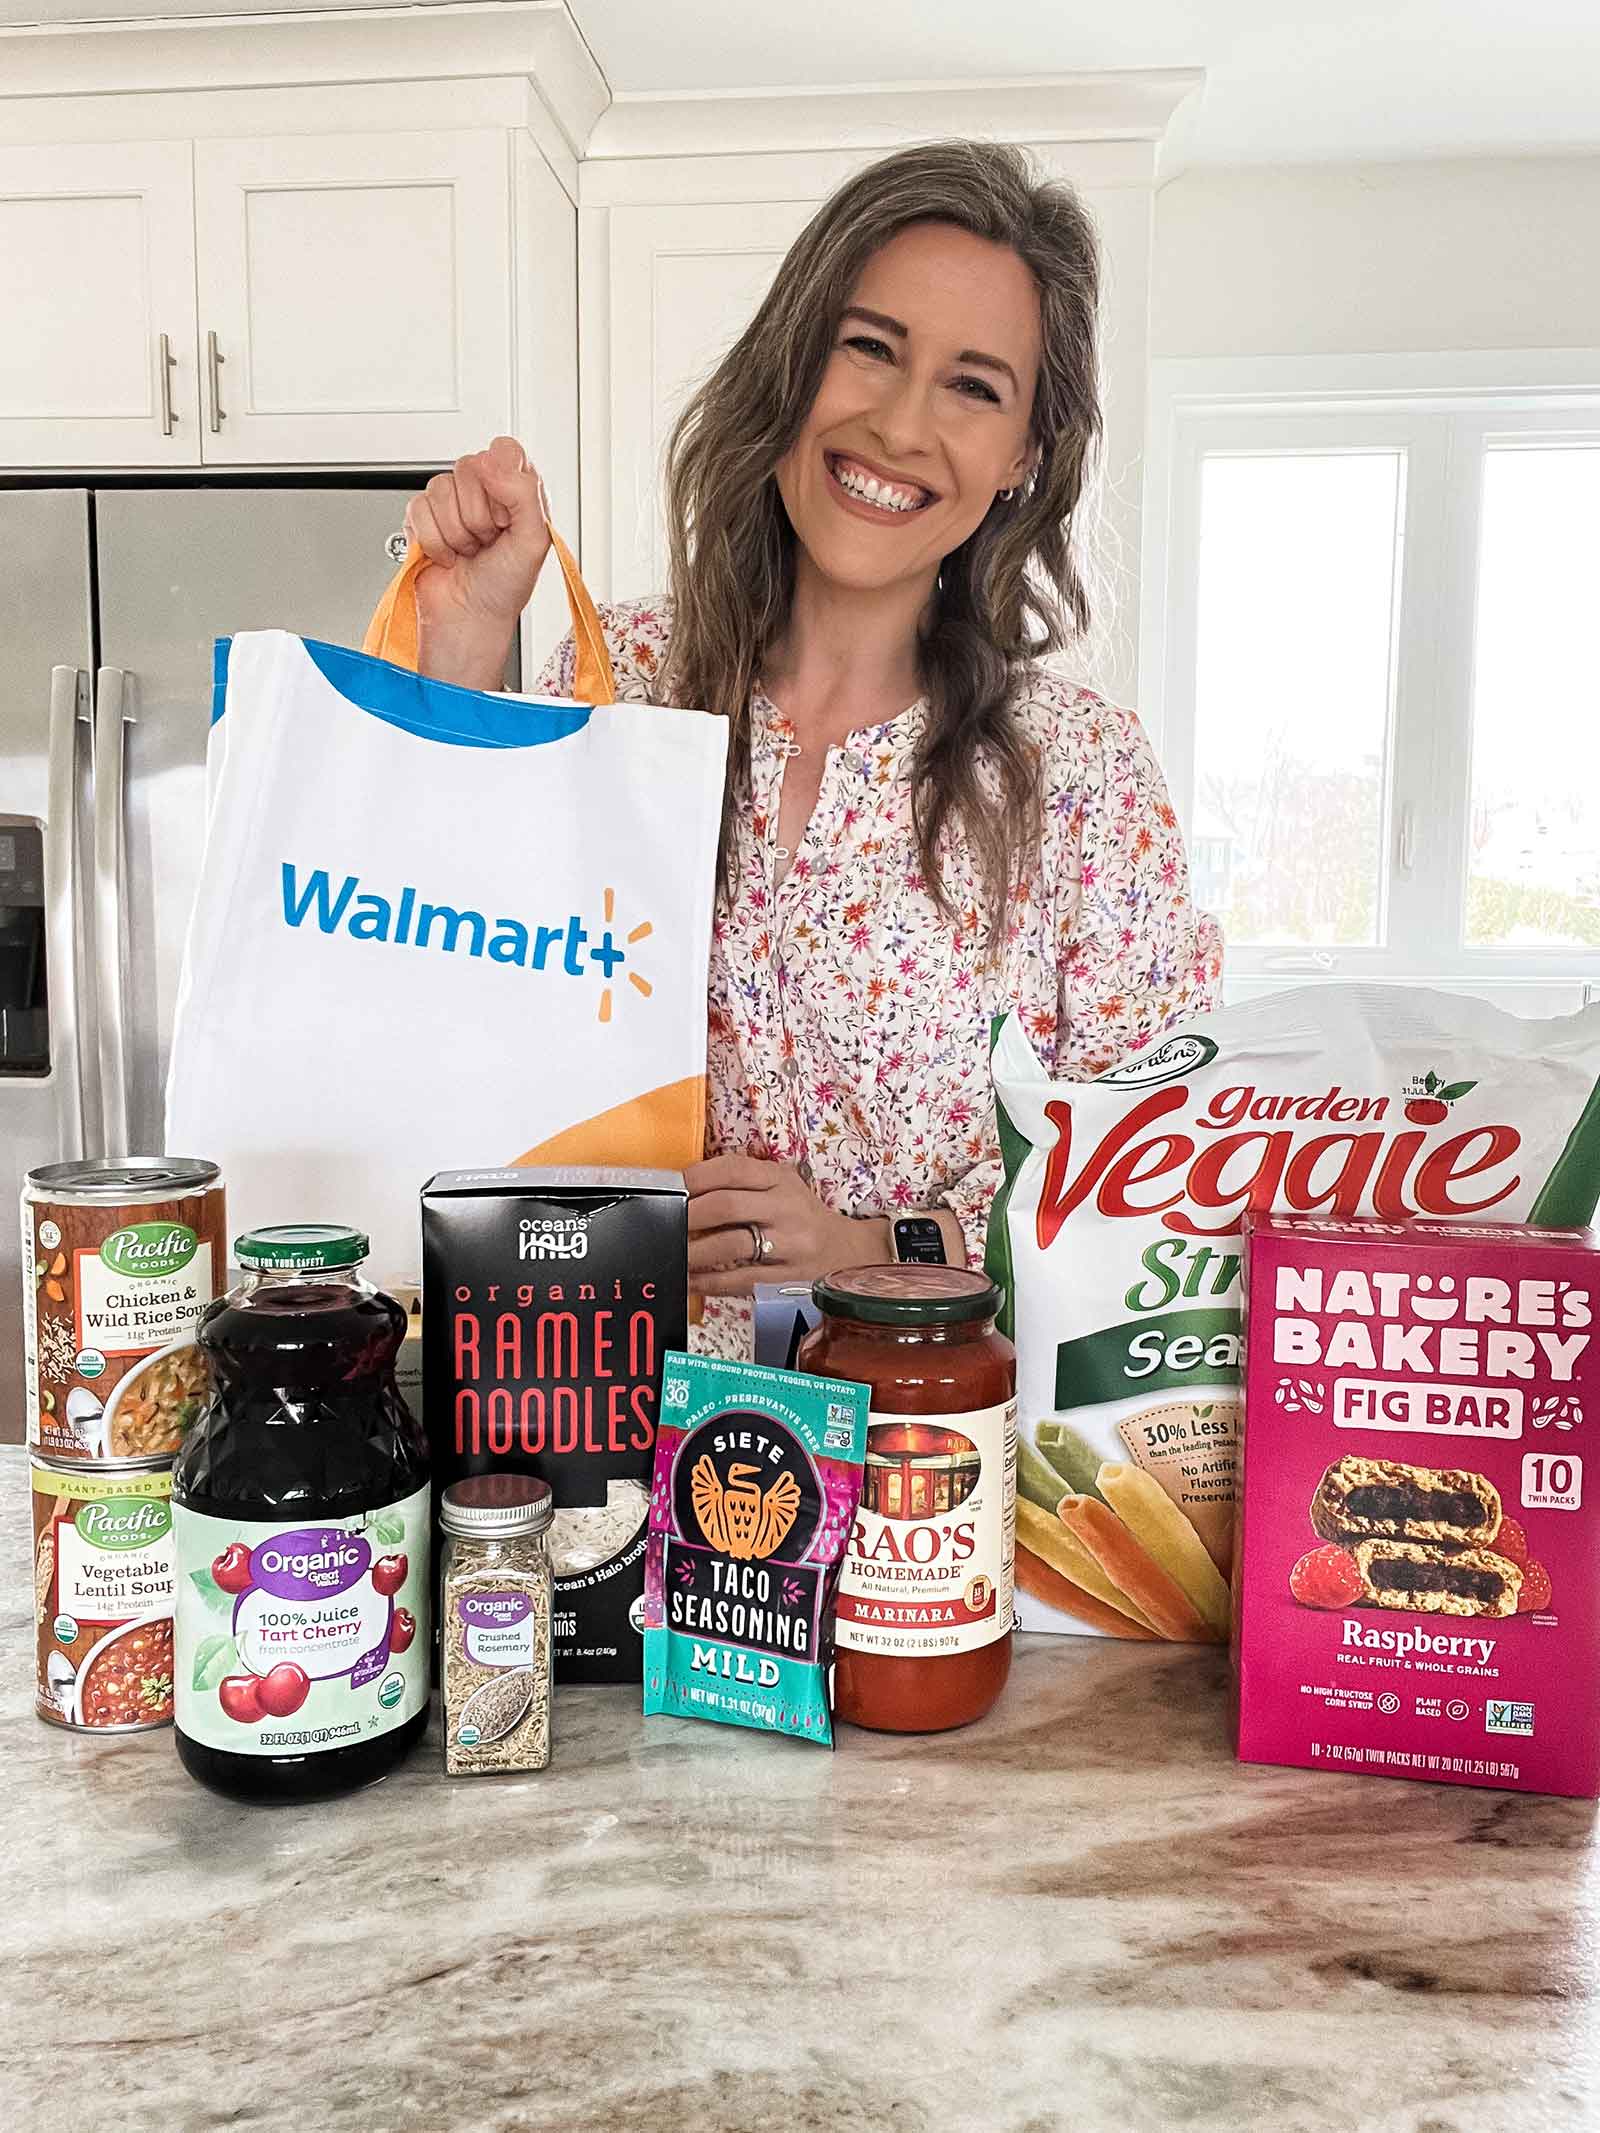 Walmart+ membership is totally worth it! Here are some of my favorite benefits and healthy foods I can get delivered with my membership.